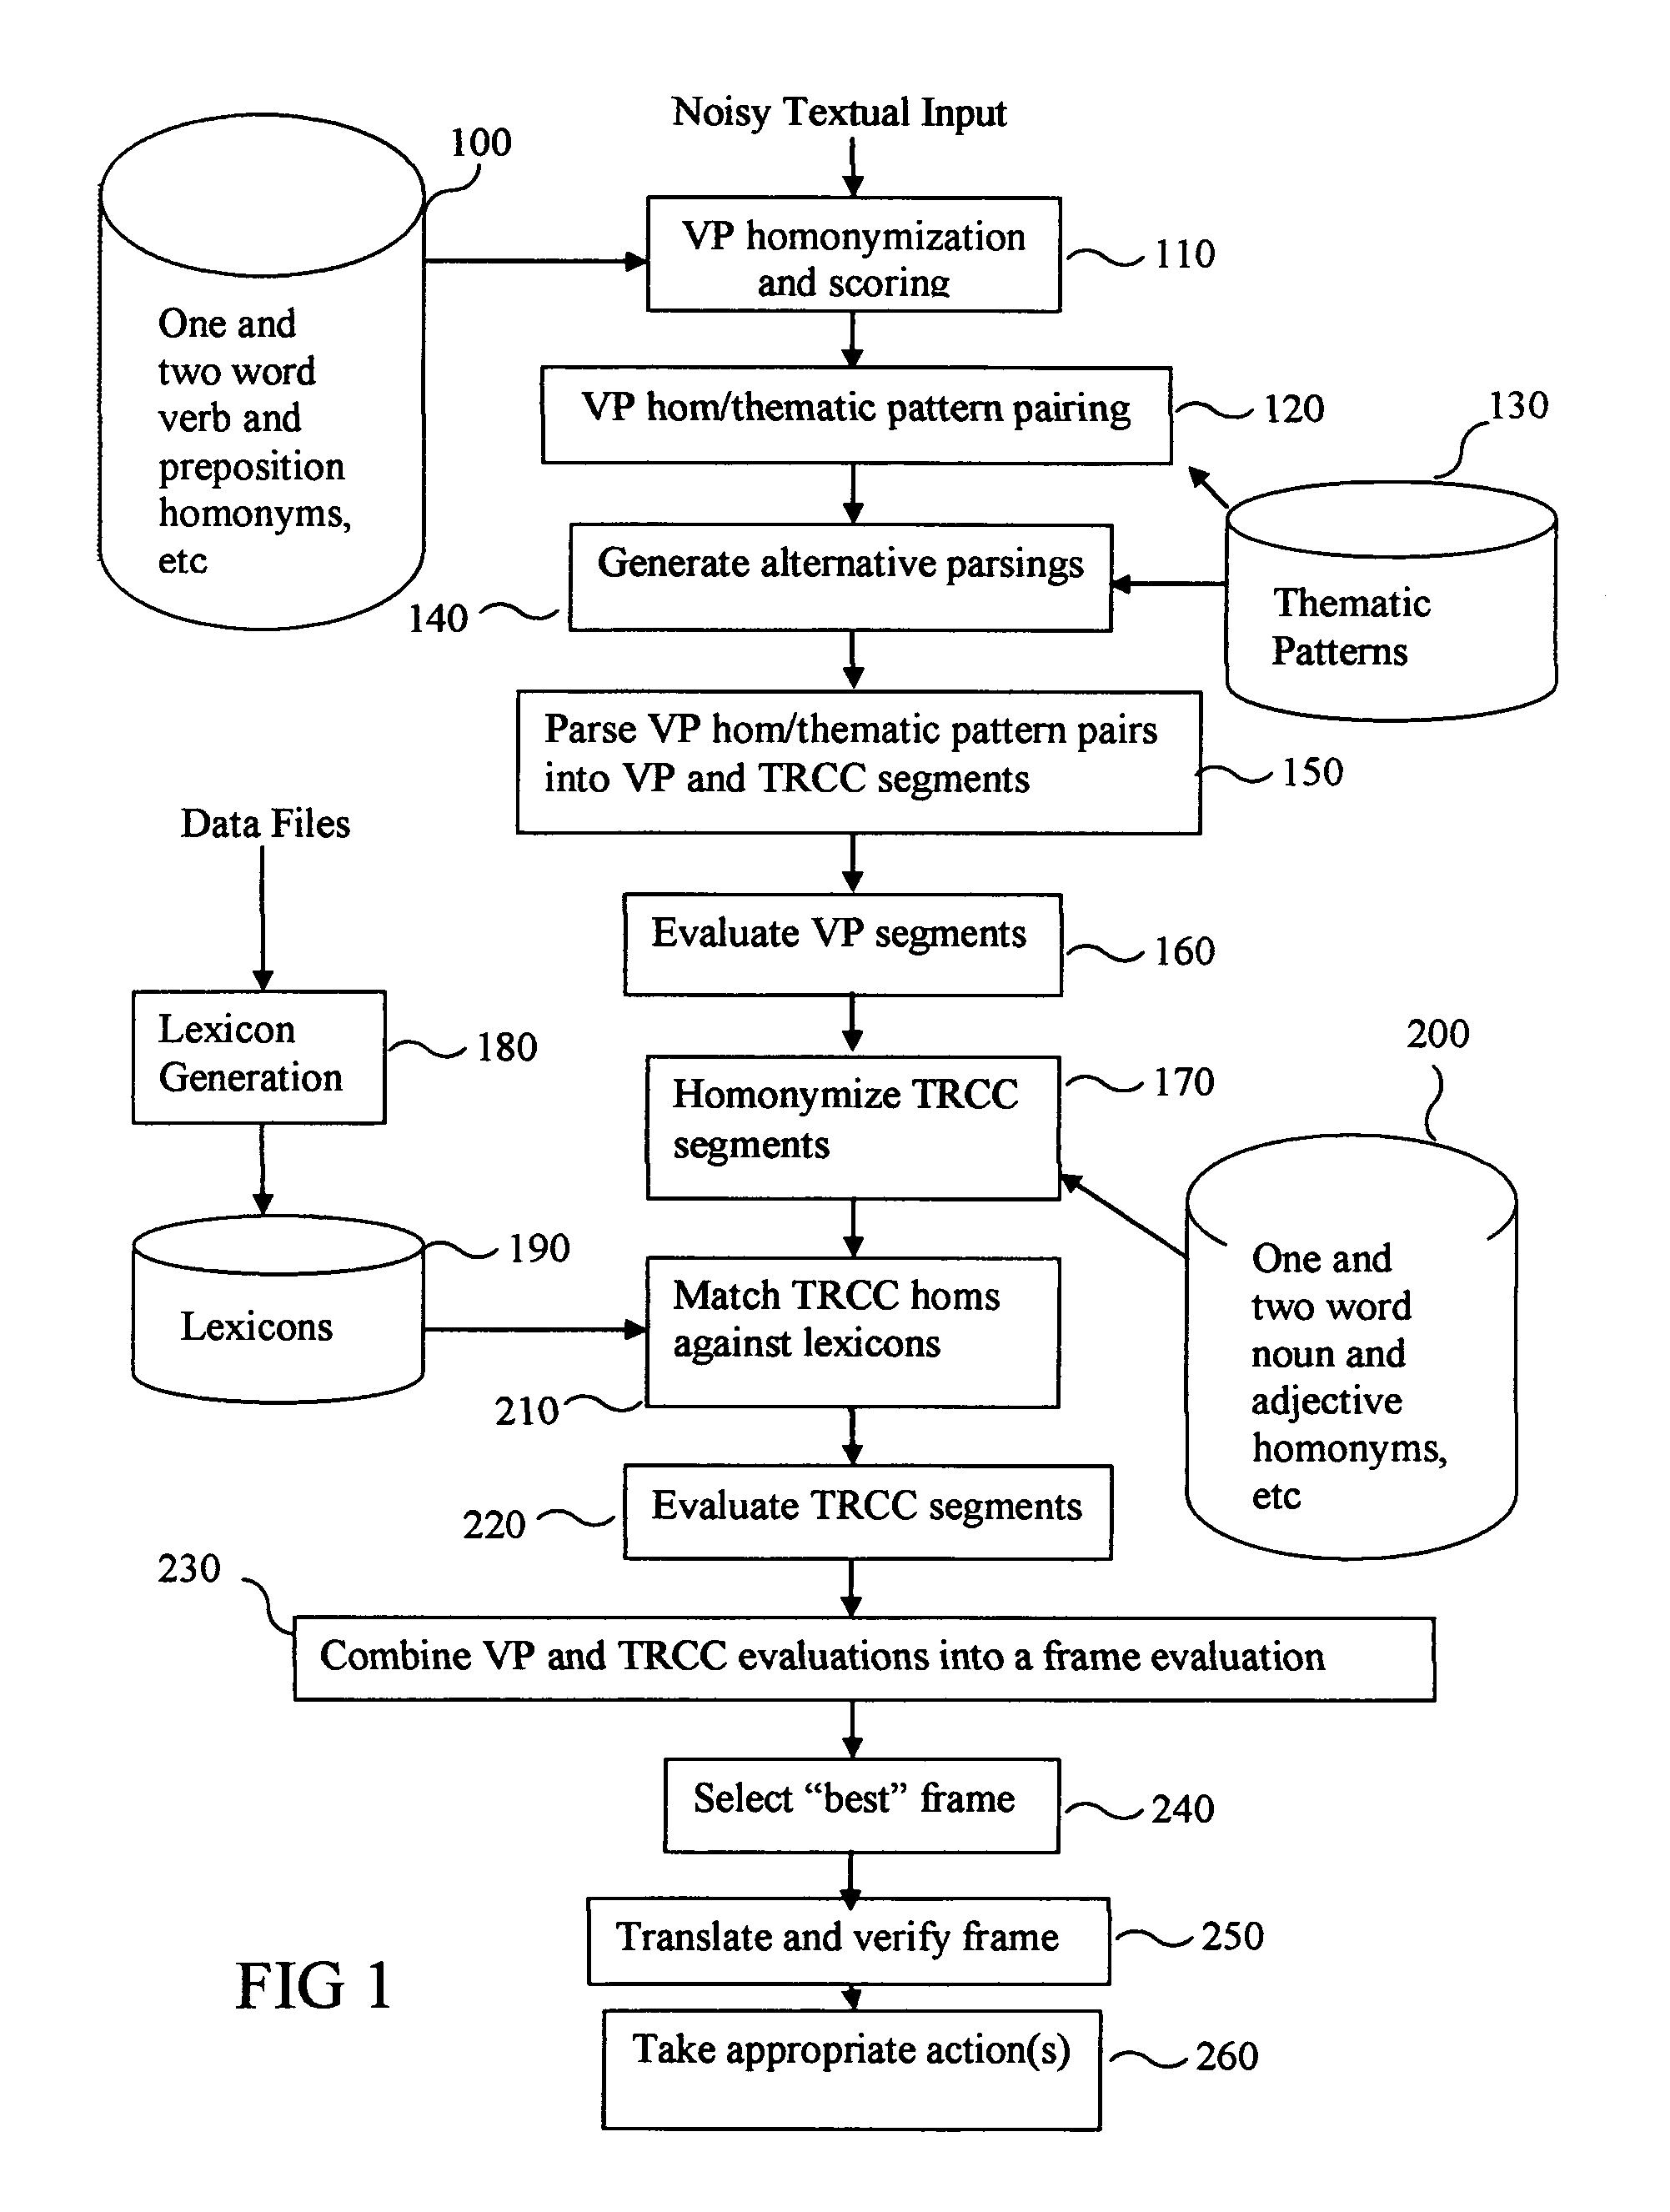 Method for recognizing and interpreting patterns in noisy data sequences